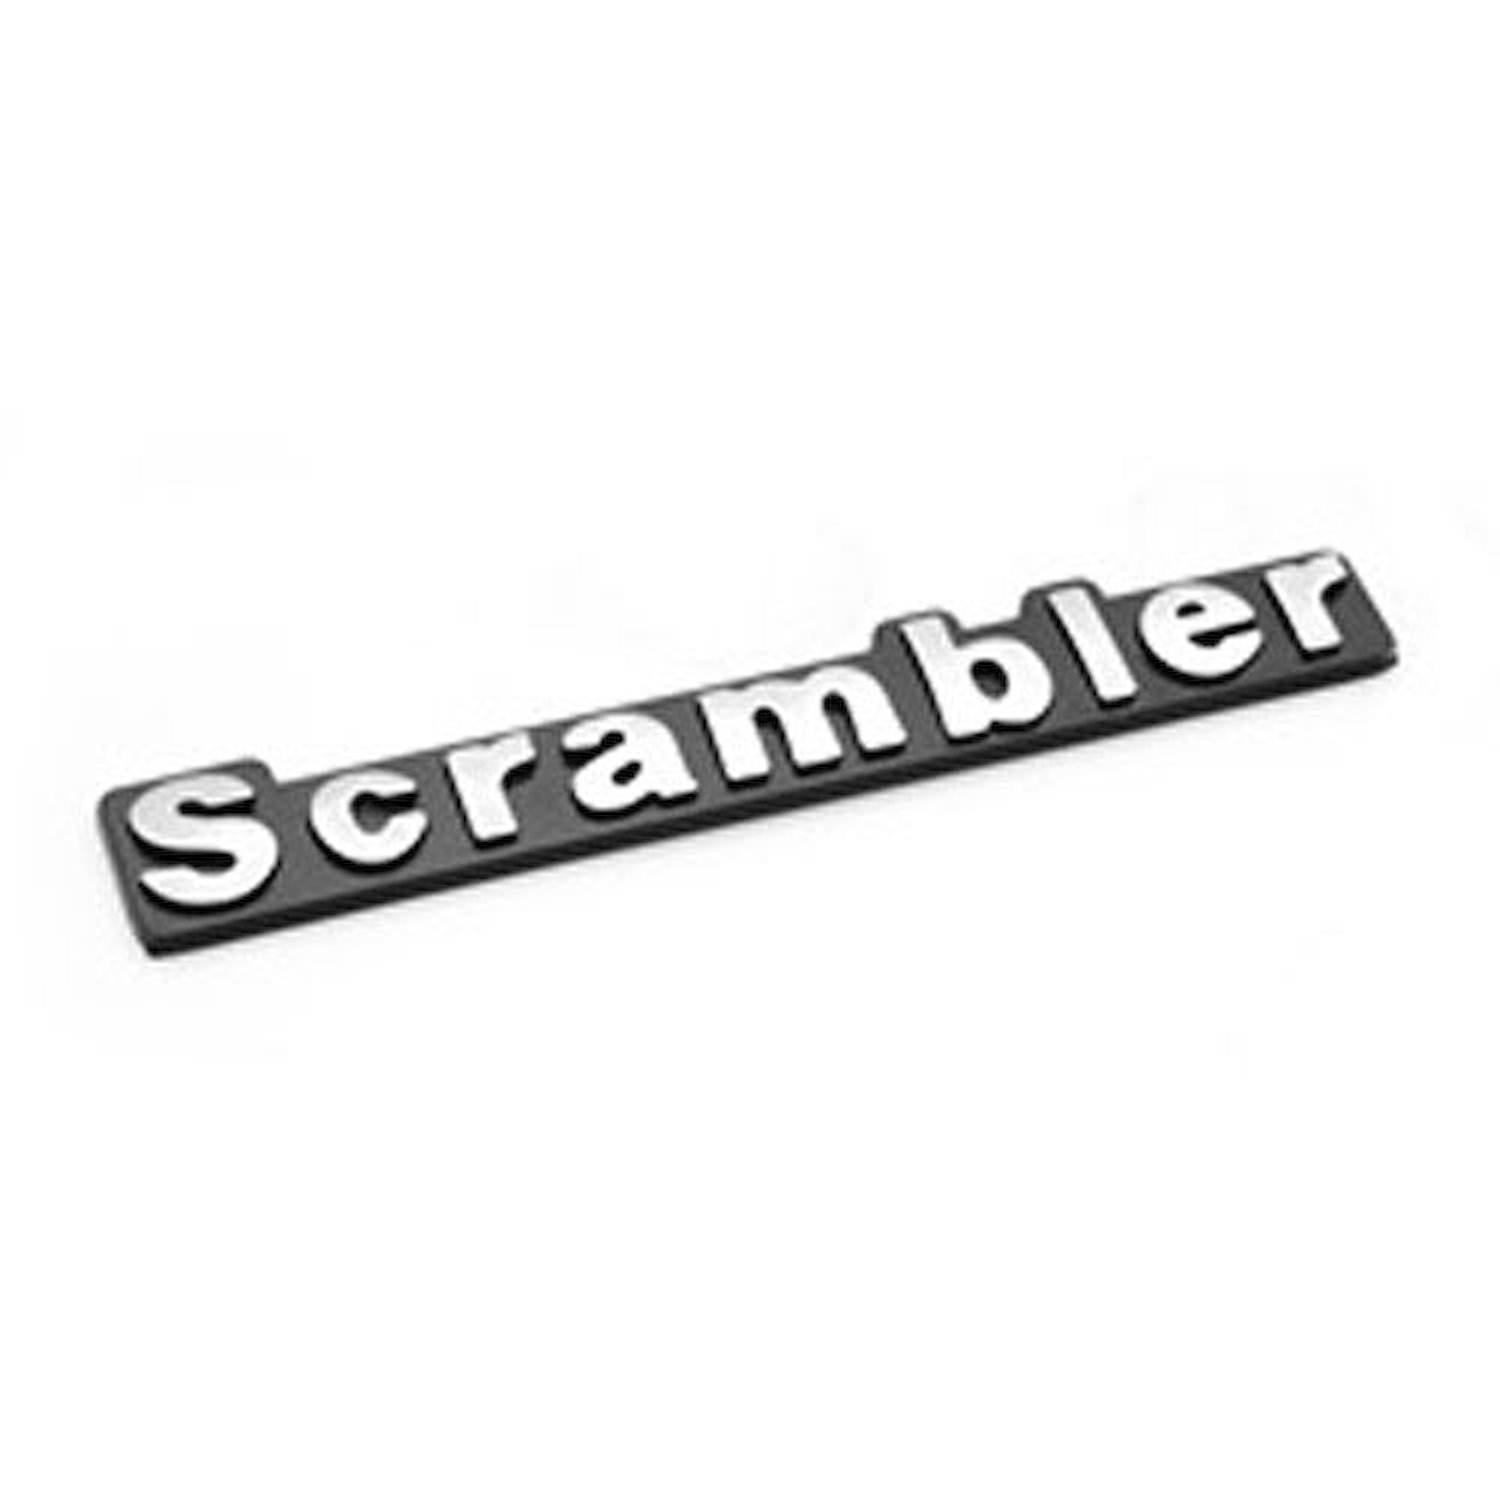 This officially licensed Scrambler emblem from MOPAR attaches to your Jeep with double-backed adhesive tape. for 81-86 Jeep CJ8.